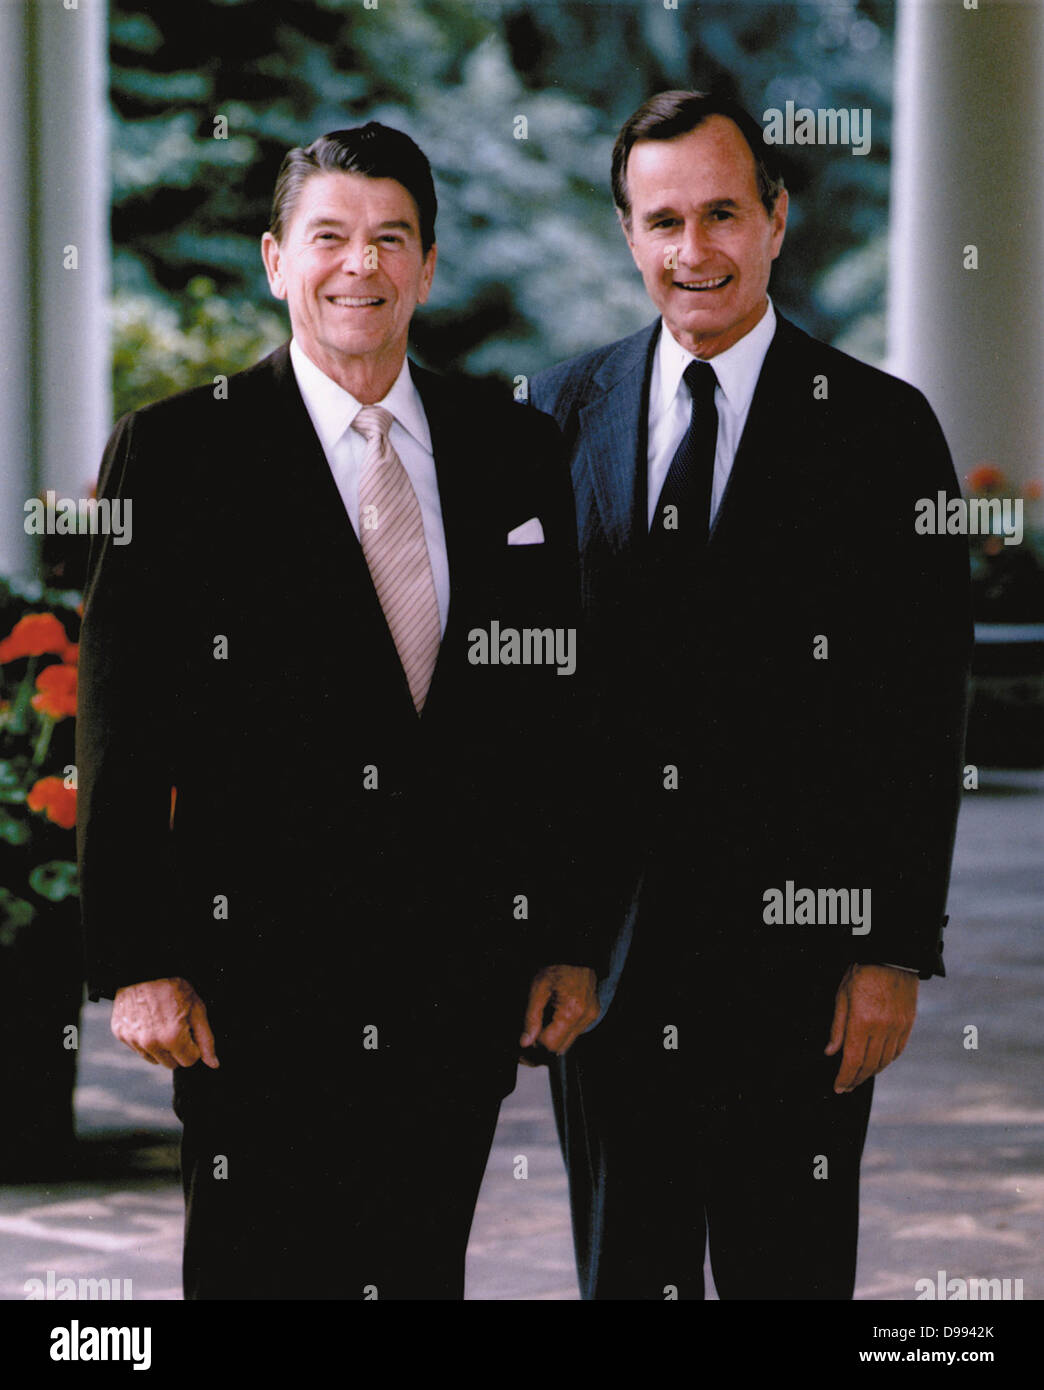 Ronald Wilson Reagan (1911-2004) 40th President of the United States 1981-1989, with his Vice-President and successor George Herbert Bush (born 1924) President of the United States 1989–1993. American Politician Republican Stock Photo